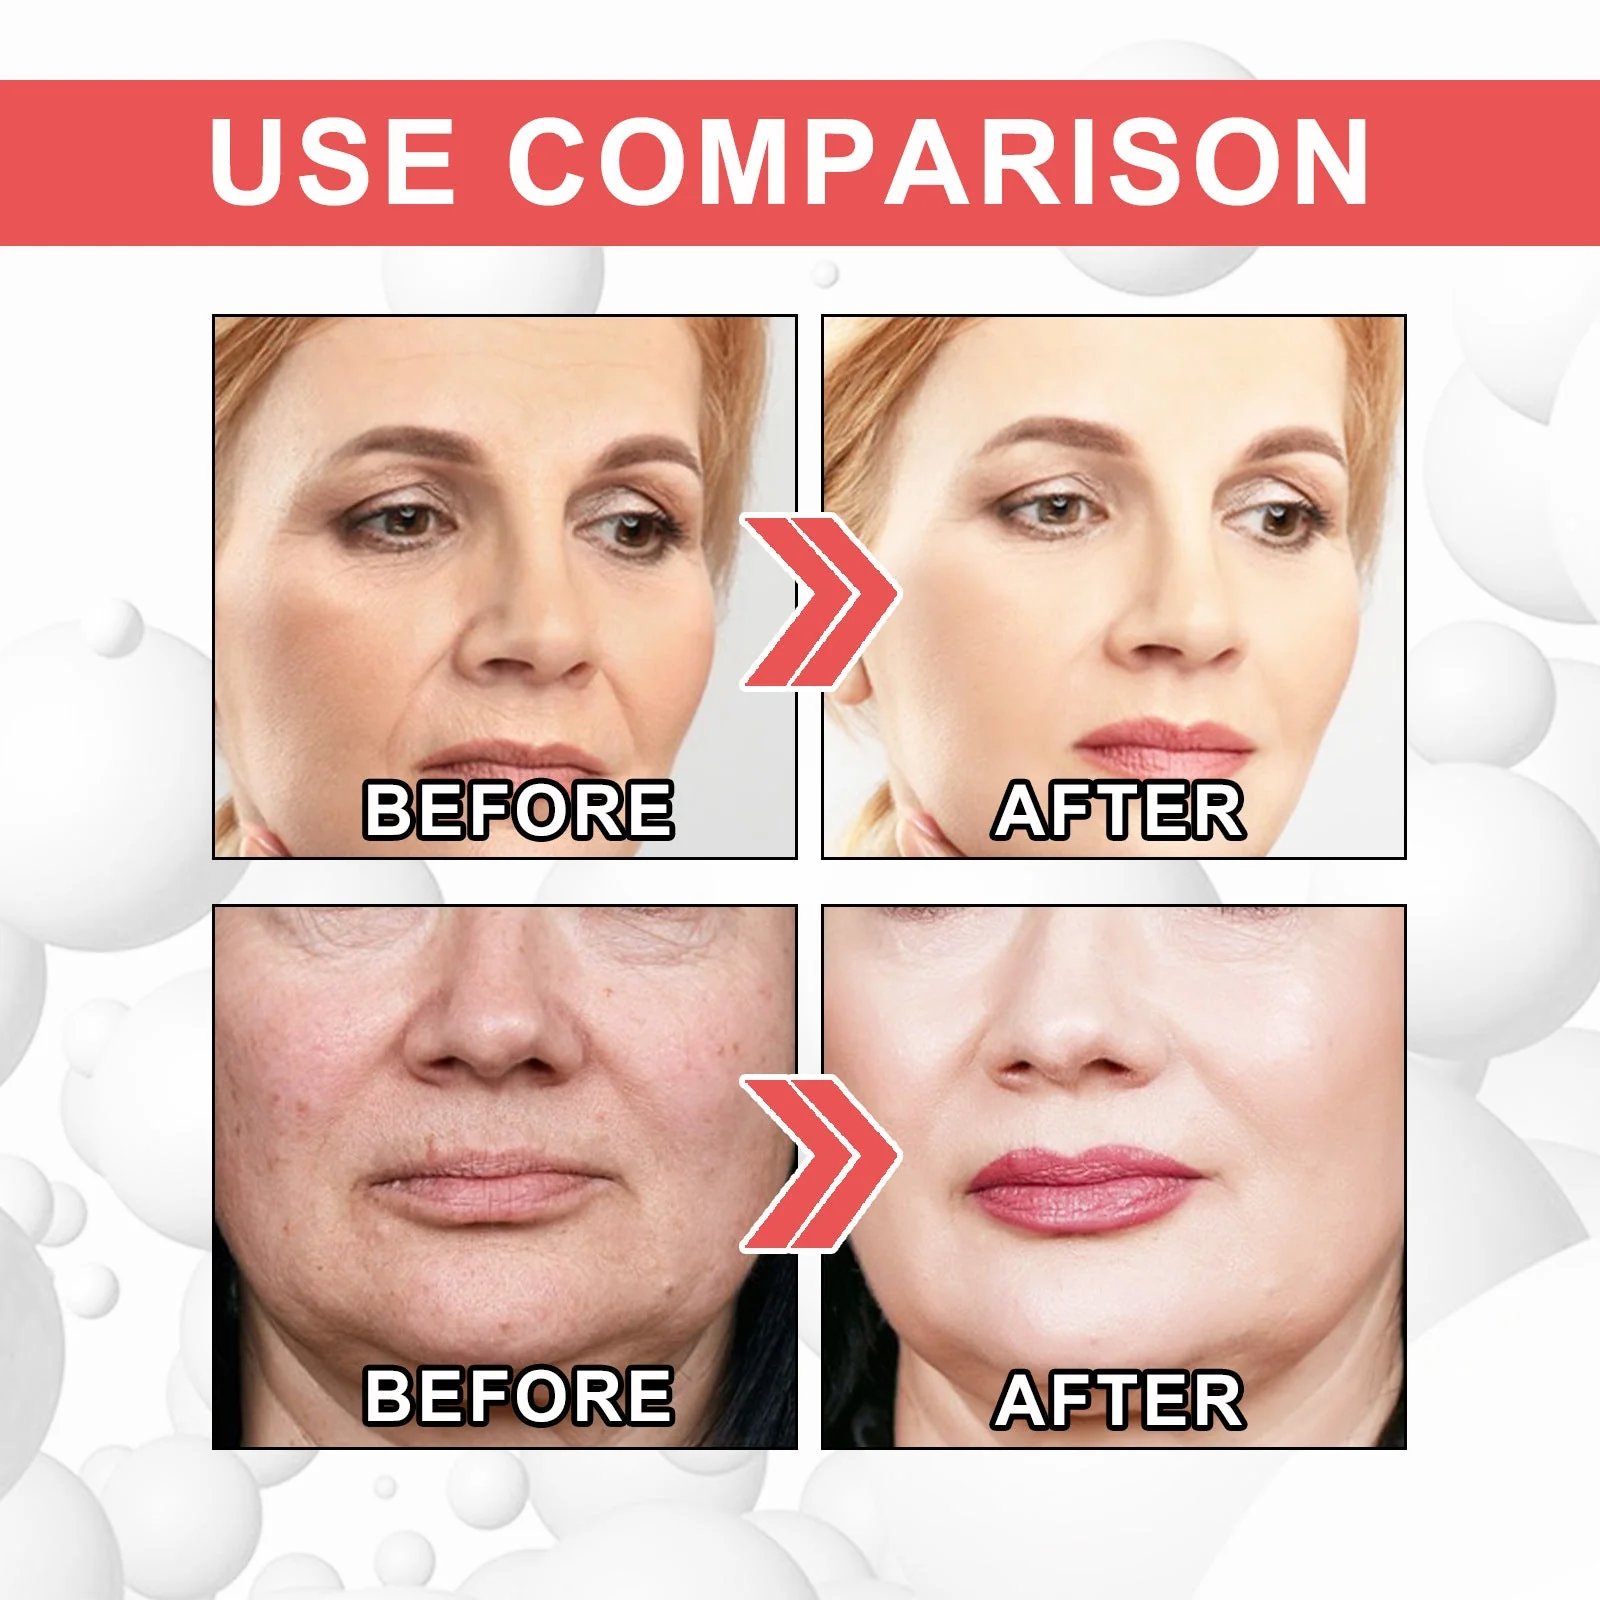 Last Day Promotion 49% OFF - 🔥2023 New Collagen Boost Anti-Aging Serum